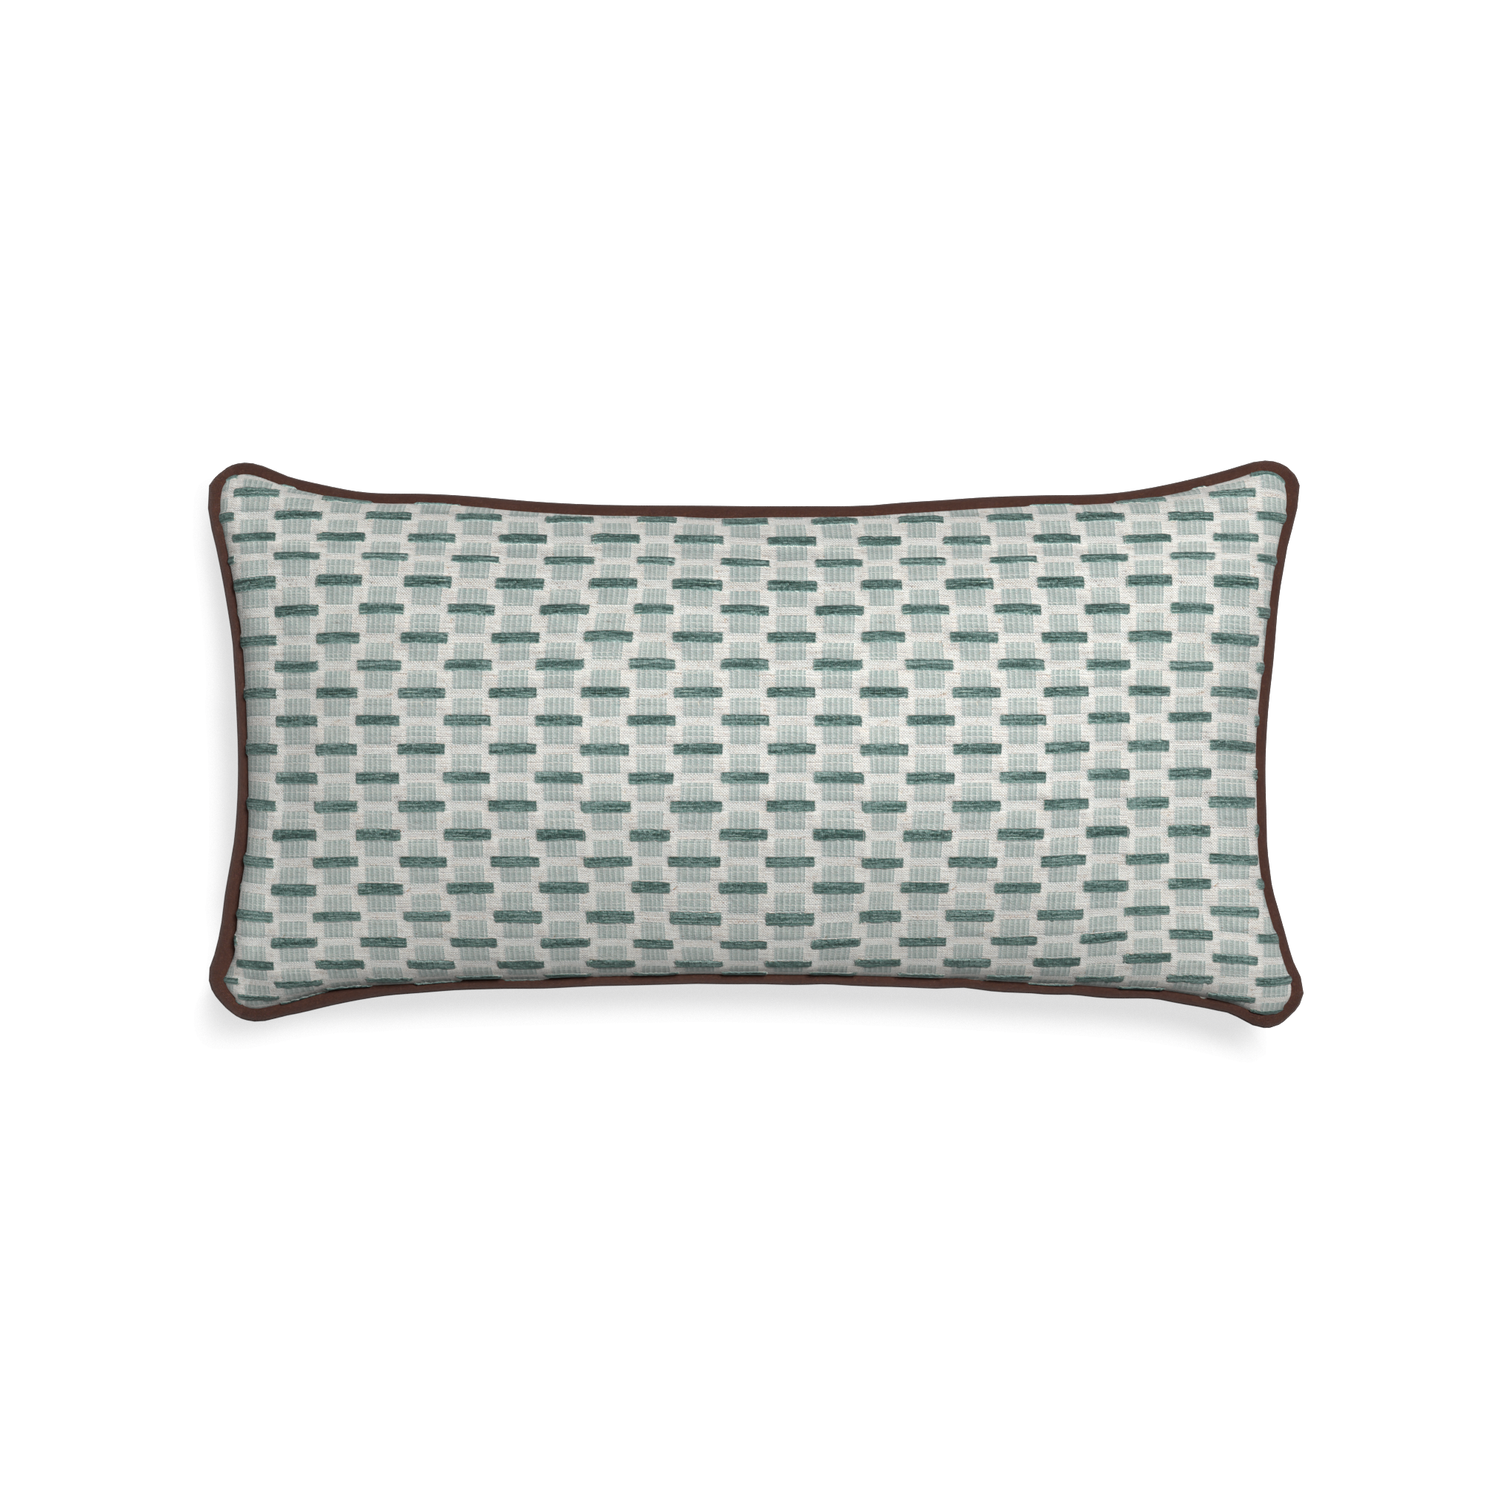 Midi-lumbar willow mint custom green geometric chenillepillow with w piping on white background